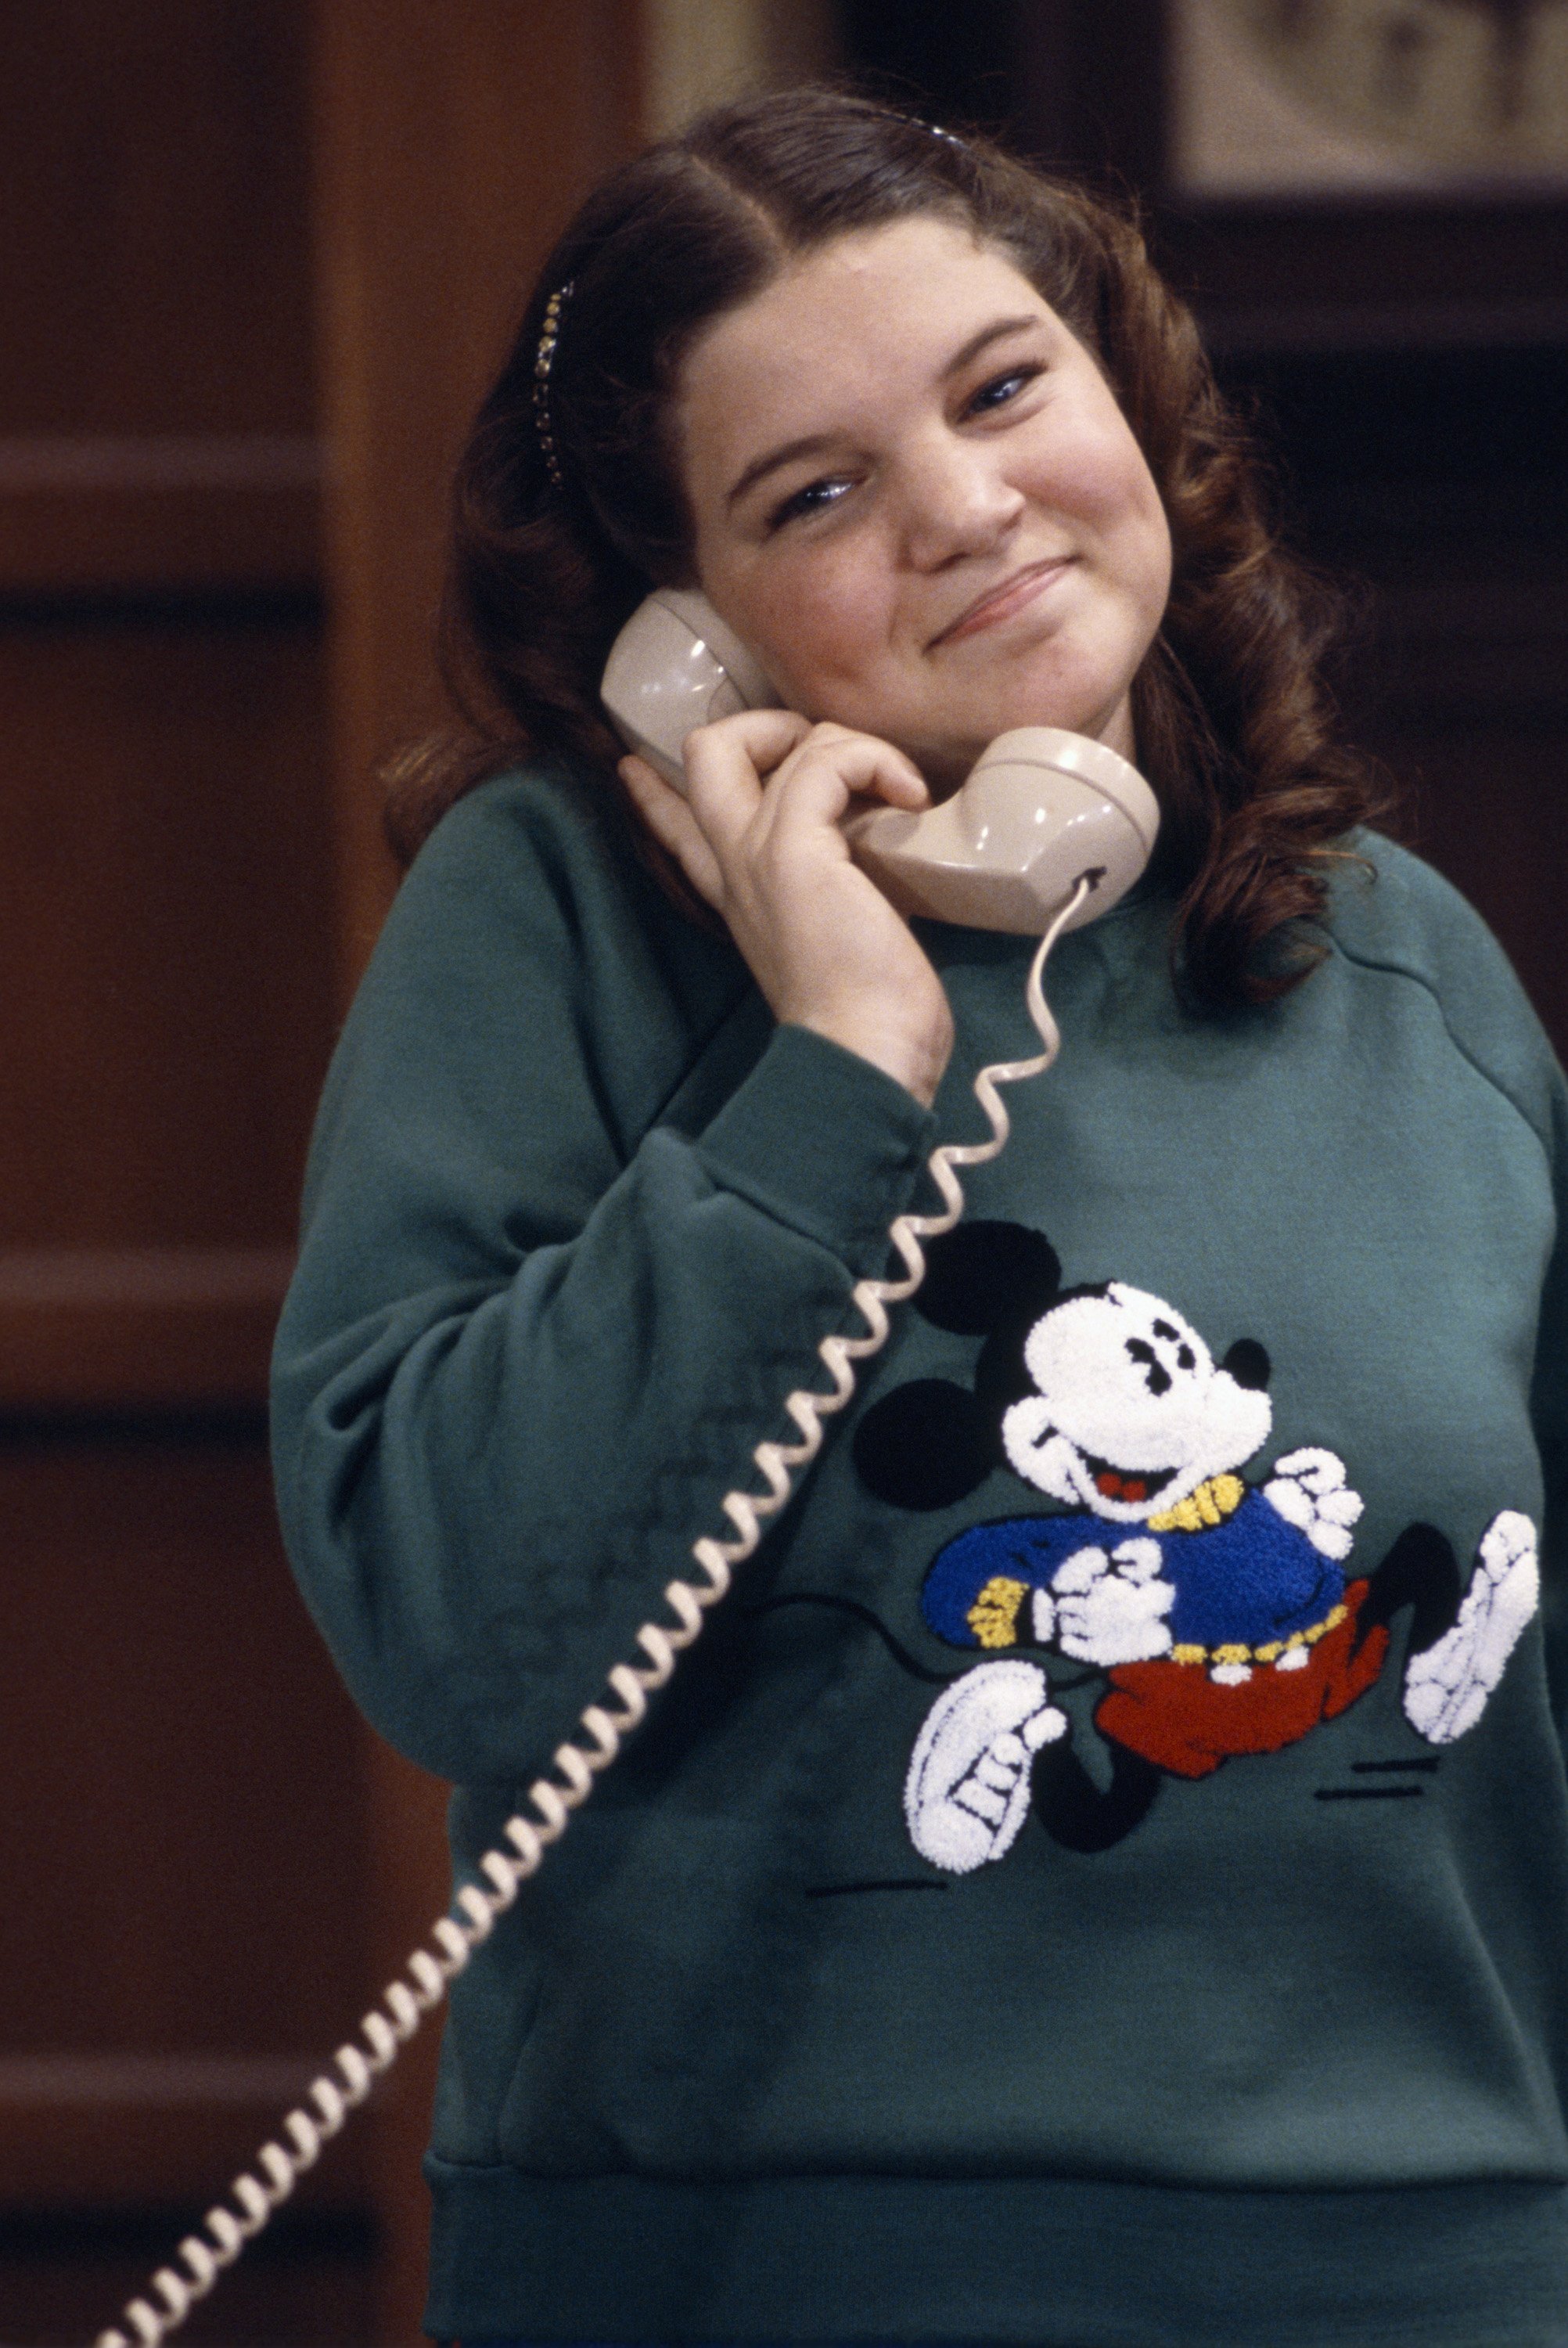 Mindy Cohn as Natalie Green in "The Facts of Life," on May 2, 1980 ┃Source: Getty Images